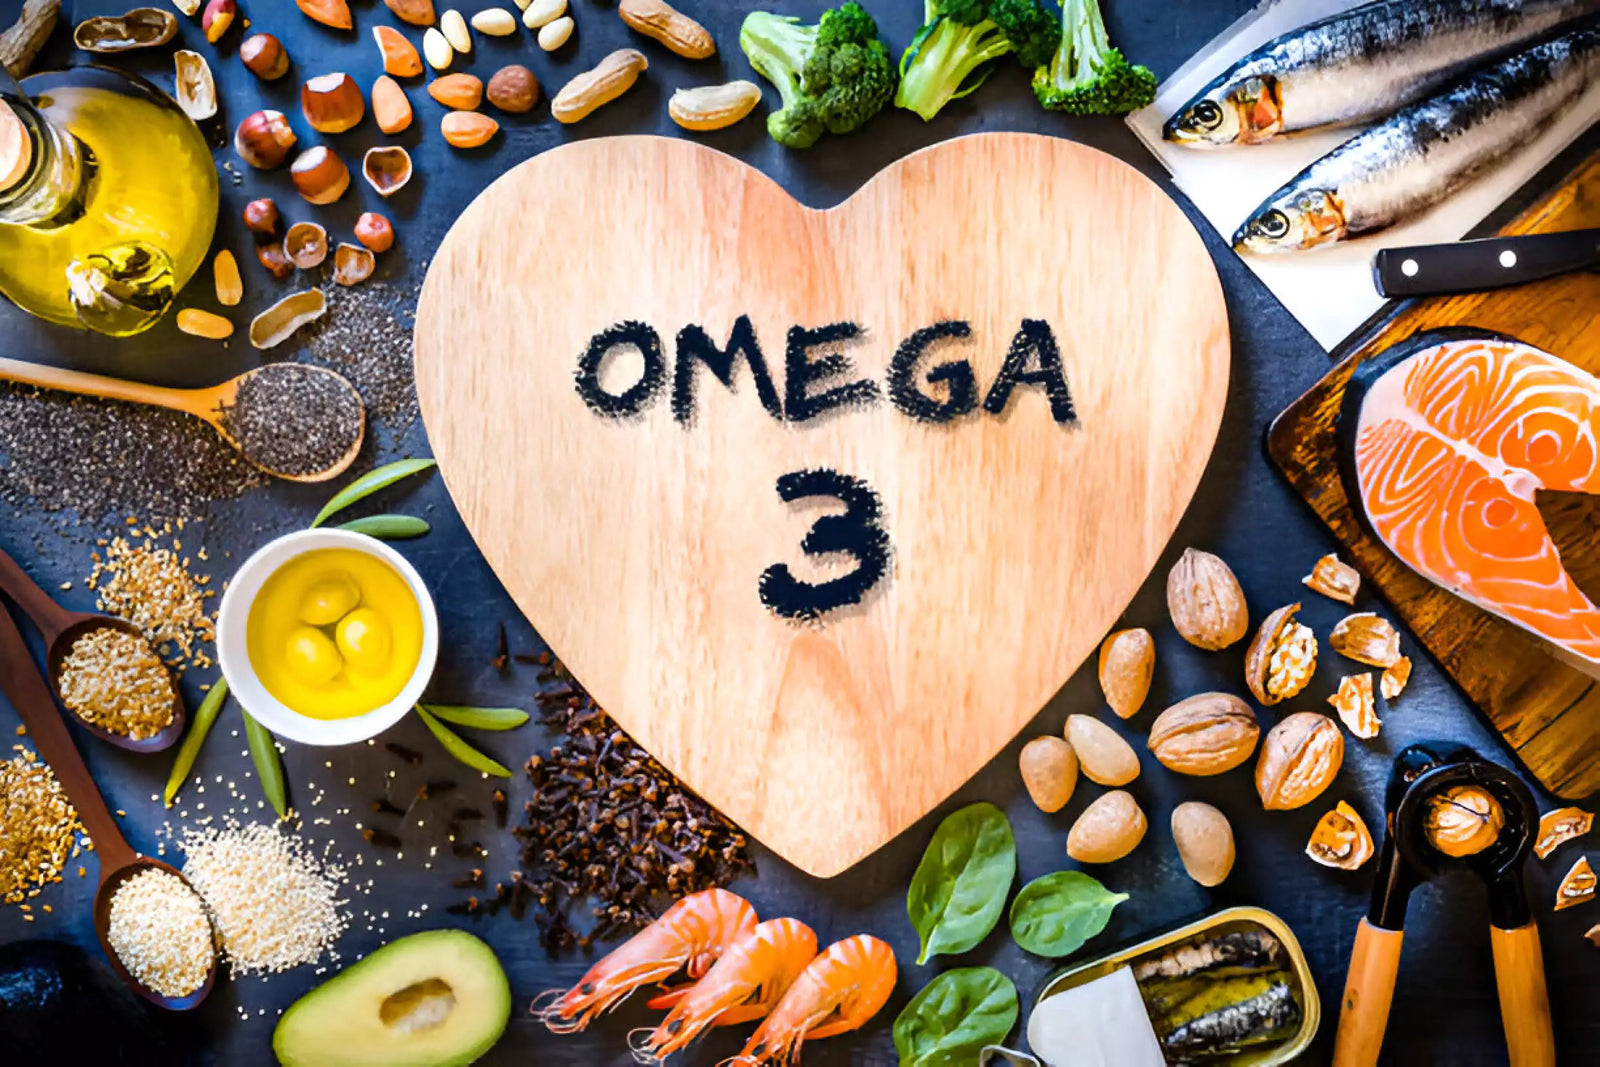 Fish Oil vs Vegetarian: A Guide to Different Omega-3 Sources